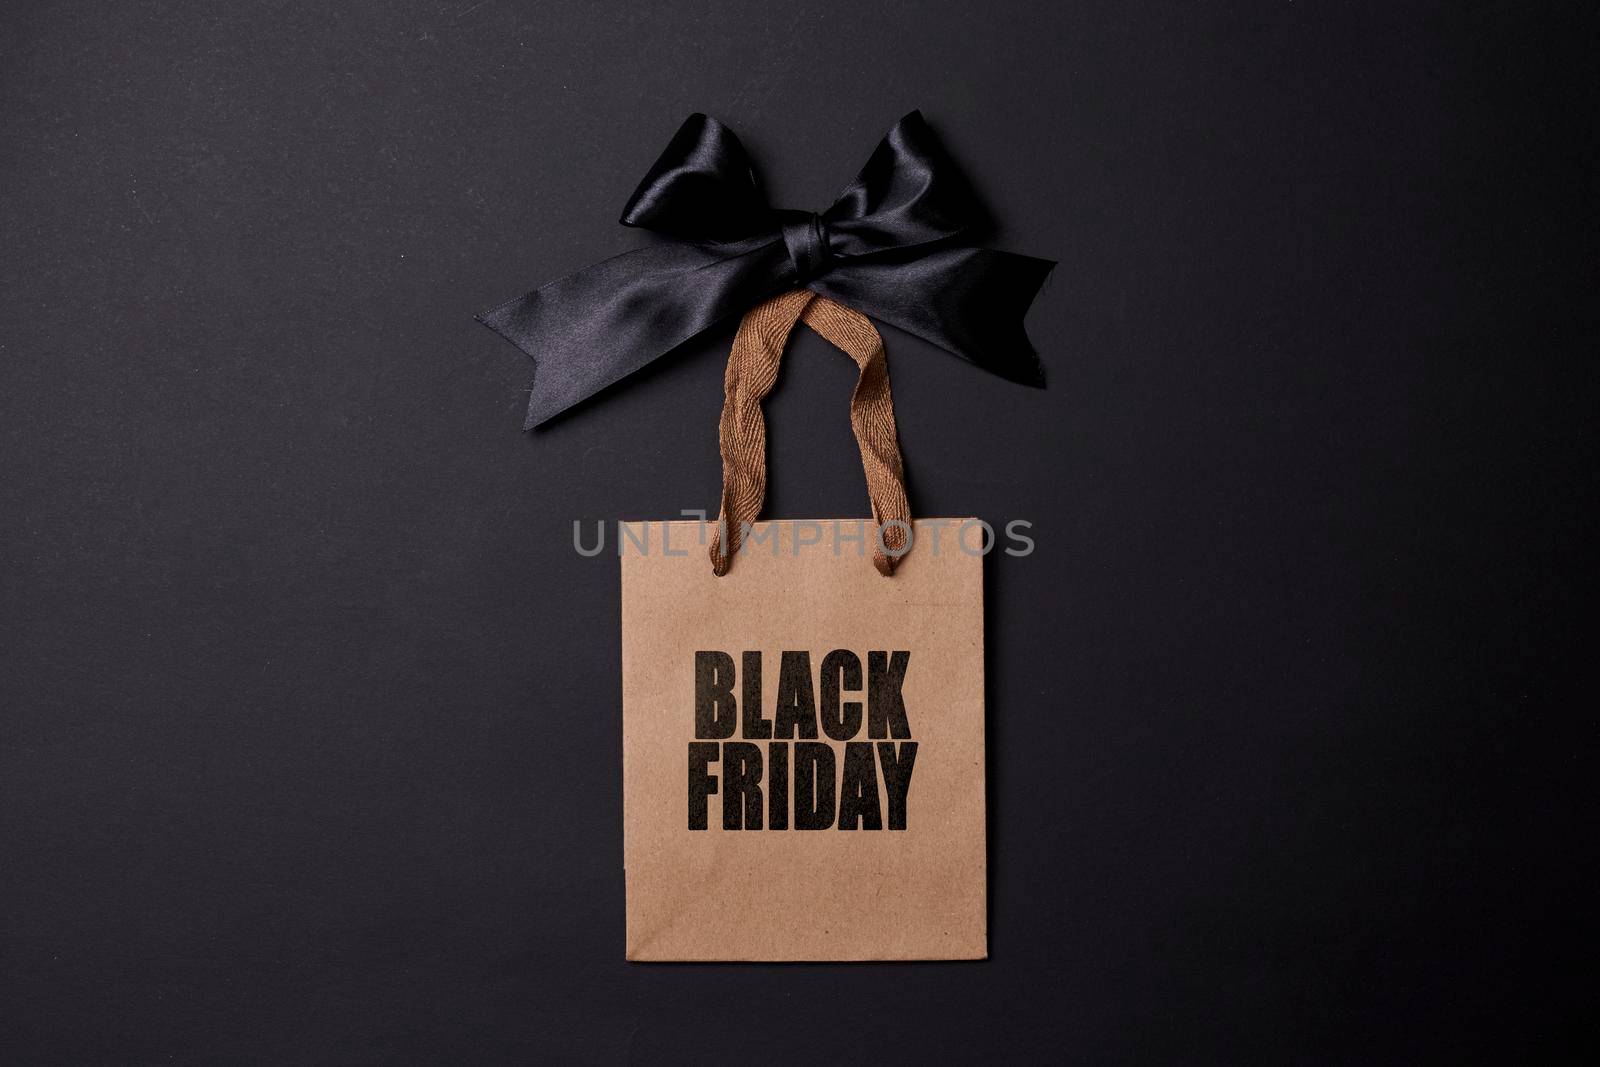 Black friday concept. Shopping bags on black background.